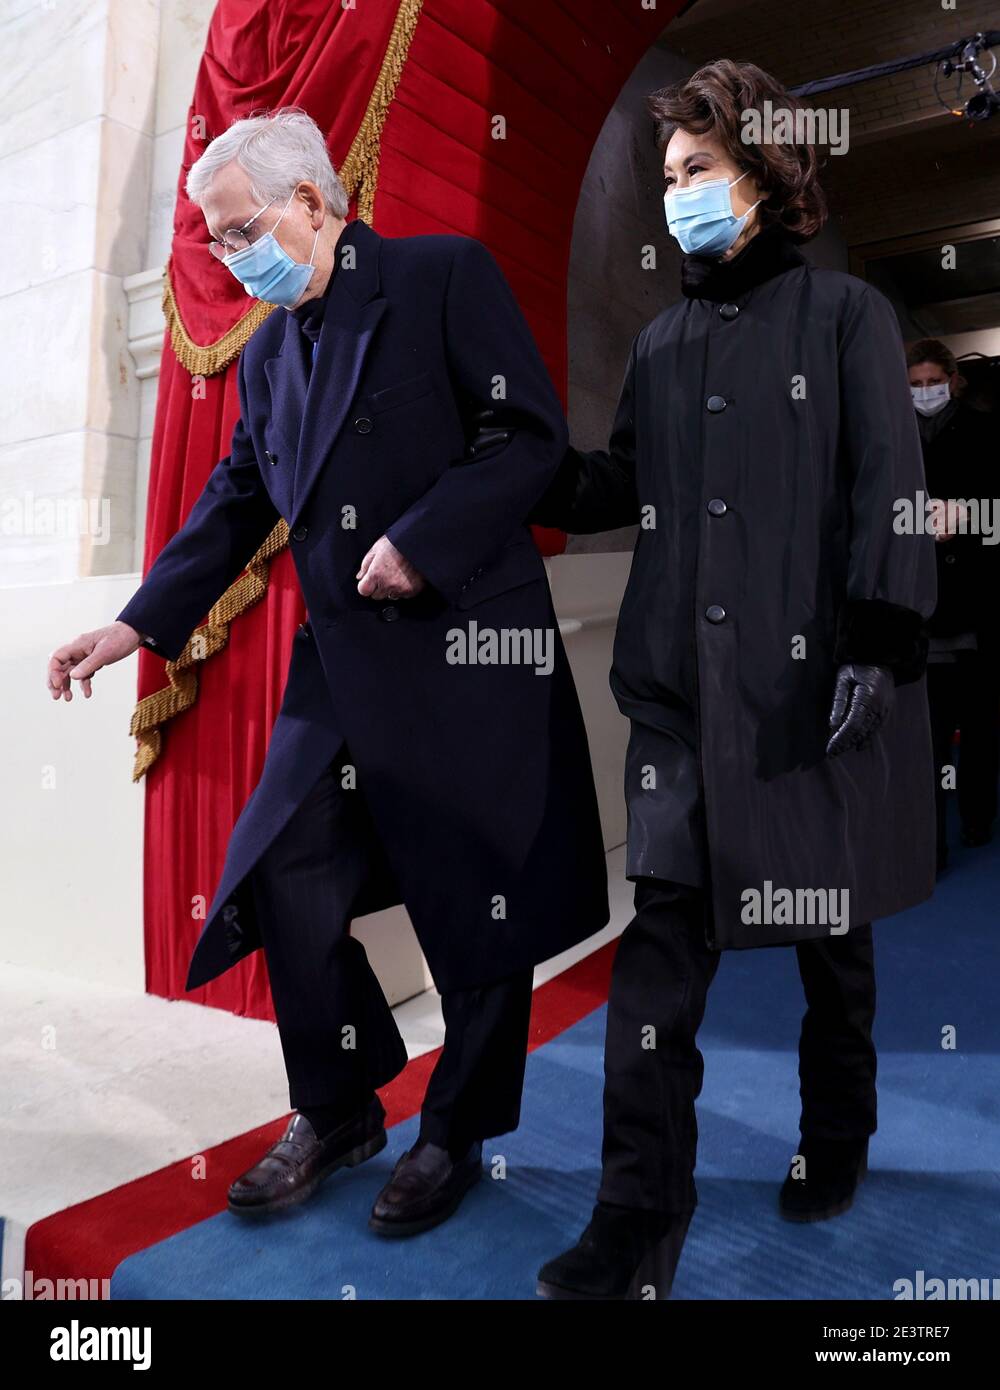 Washington, United States. 20th Jan, 2021. Senator Mitch McConnell (R-KY) arrives with his wife Elaine Chao during the inauguration of Joe Biden as the 46th President of the United States on the West Front of the U.S. Capitol in Washington on January 20, 2021. Pool Photo by Jonathan Ernst/UPI Credit: UPI/Alamy Live News Stock Photo